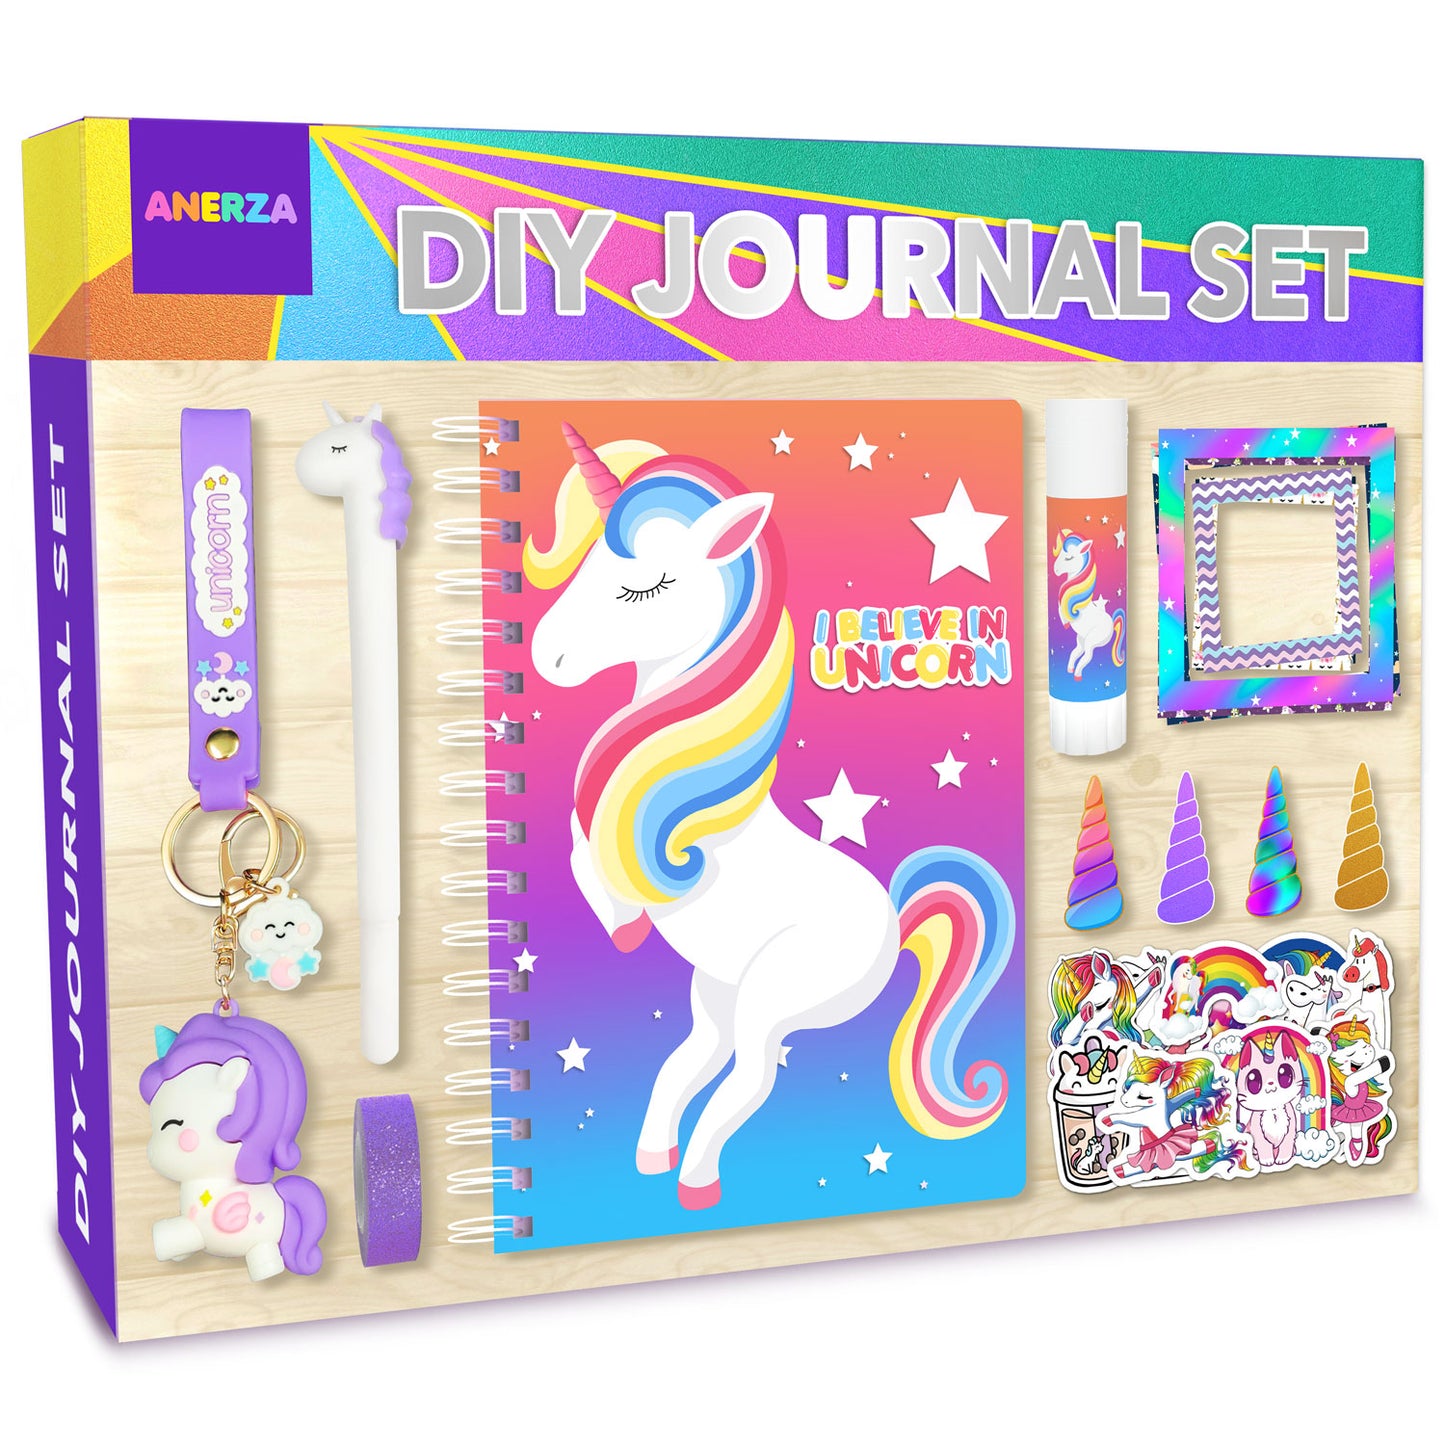 ANERZA DIY Unicorn Journal Set for Girls Gifts Ages 6 7 8 9 10 11 12 13 Years Old and Up, Birthday/Christmas Gifts Ideas, Toys for Teen Girls, Arts and Crafts for Kids 8-12, Scrapbook Stickers kit